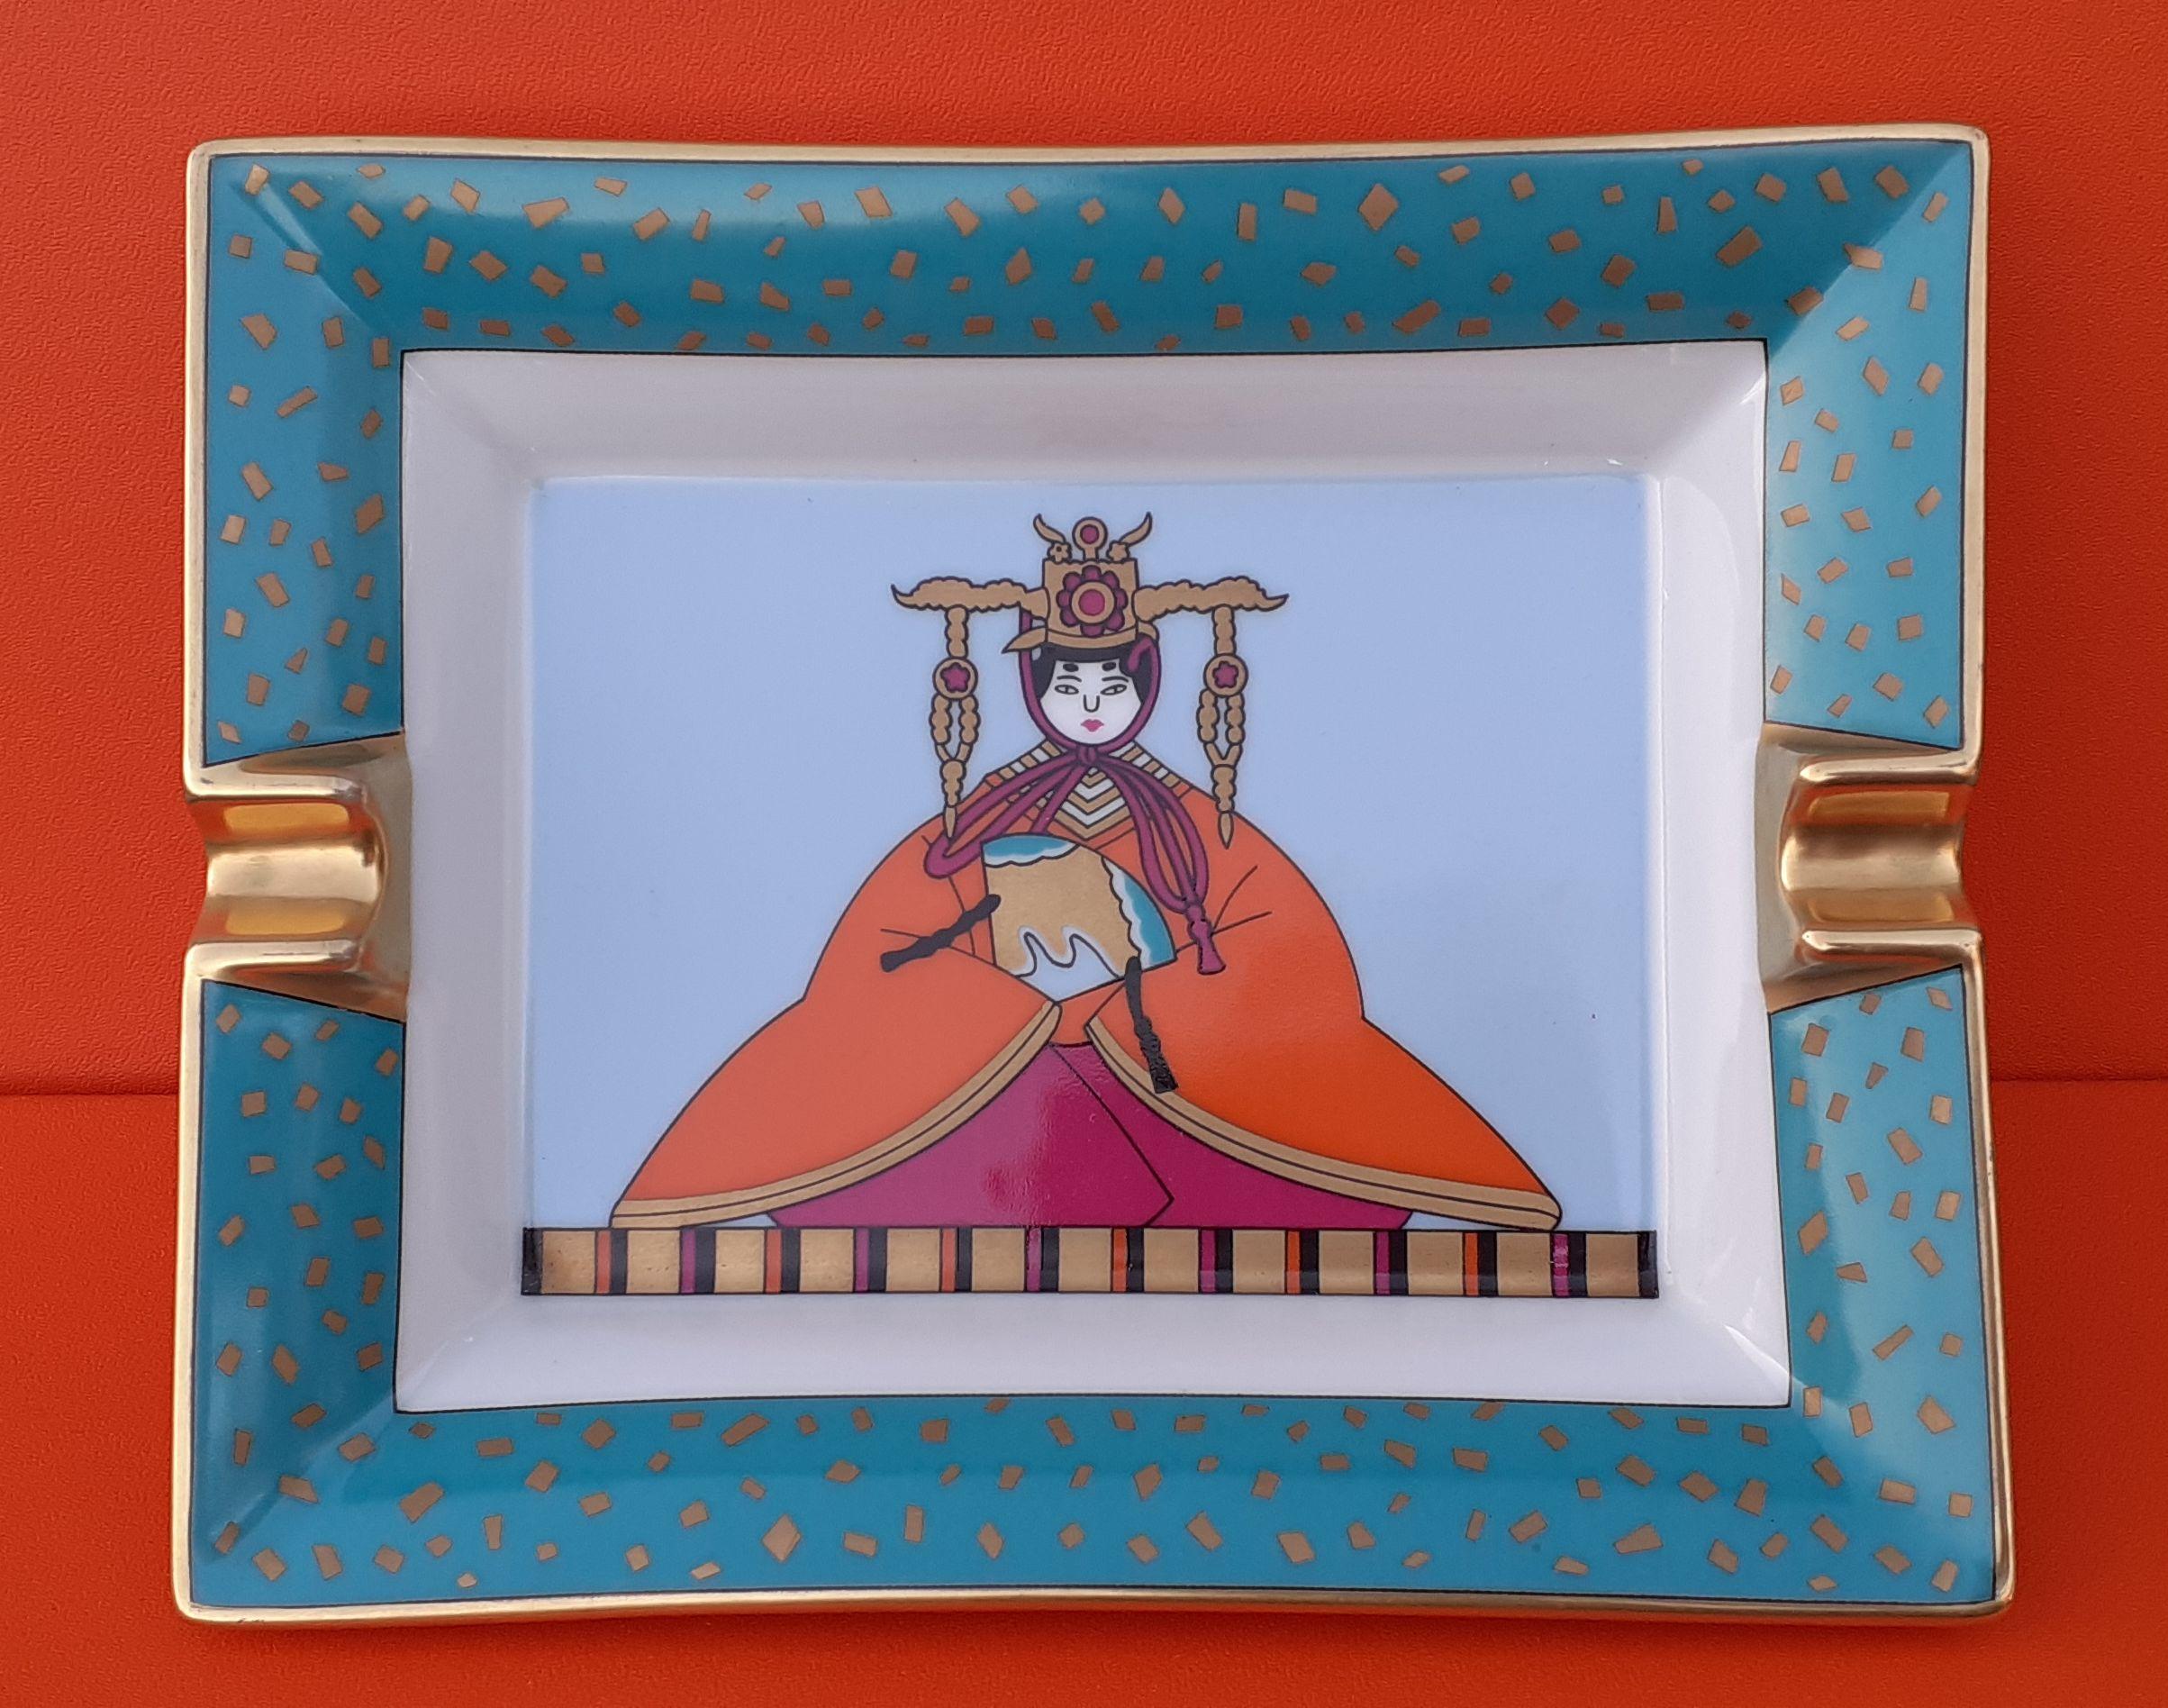 Absolutely Gorgeous and Rare Authentic Hermès Ashtray

Pattern: woman in a traditional outfit

This is hard to show in the photos that the pattern is varnished, the colors are beautiful and shiny !

Made in France

Made of Porcelain with golden